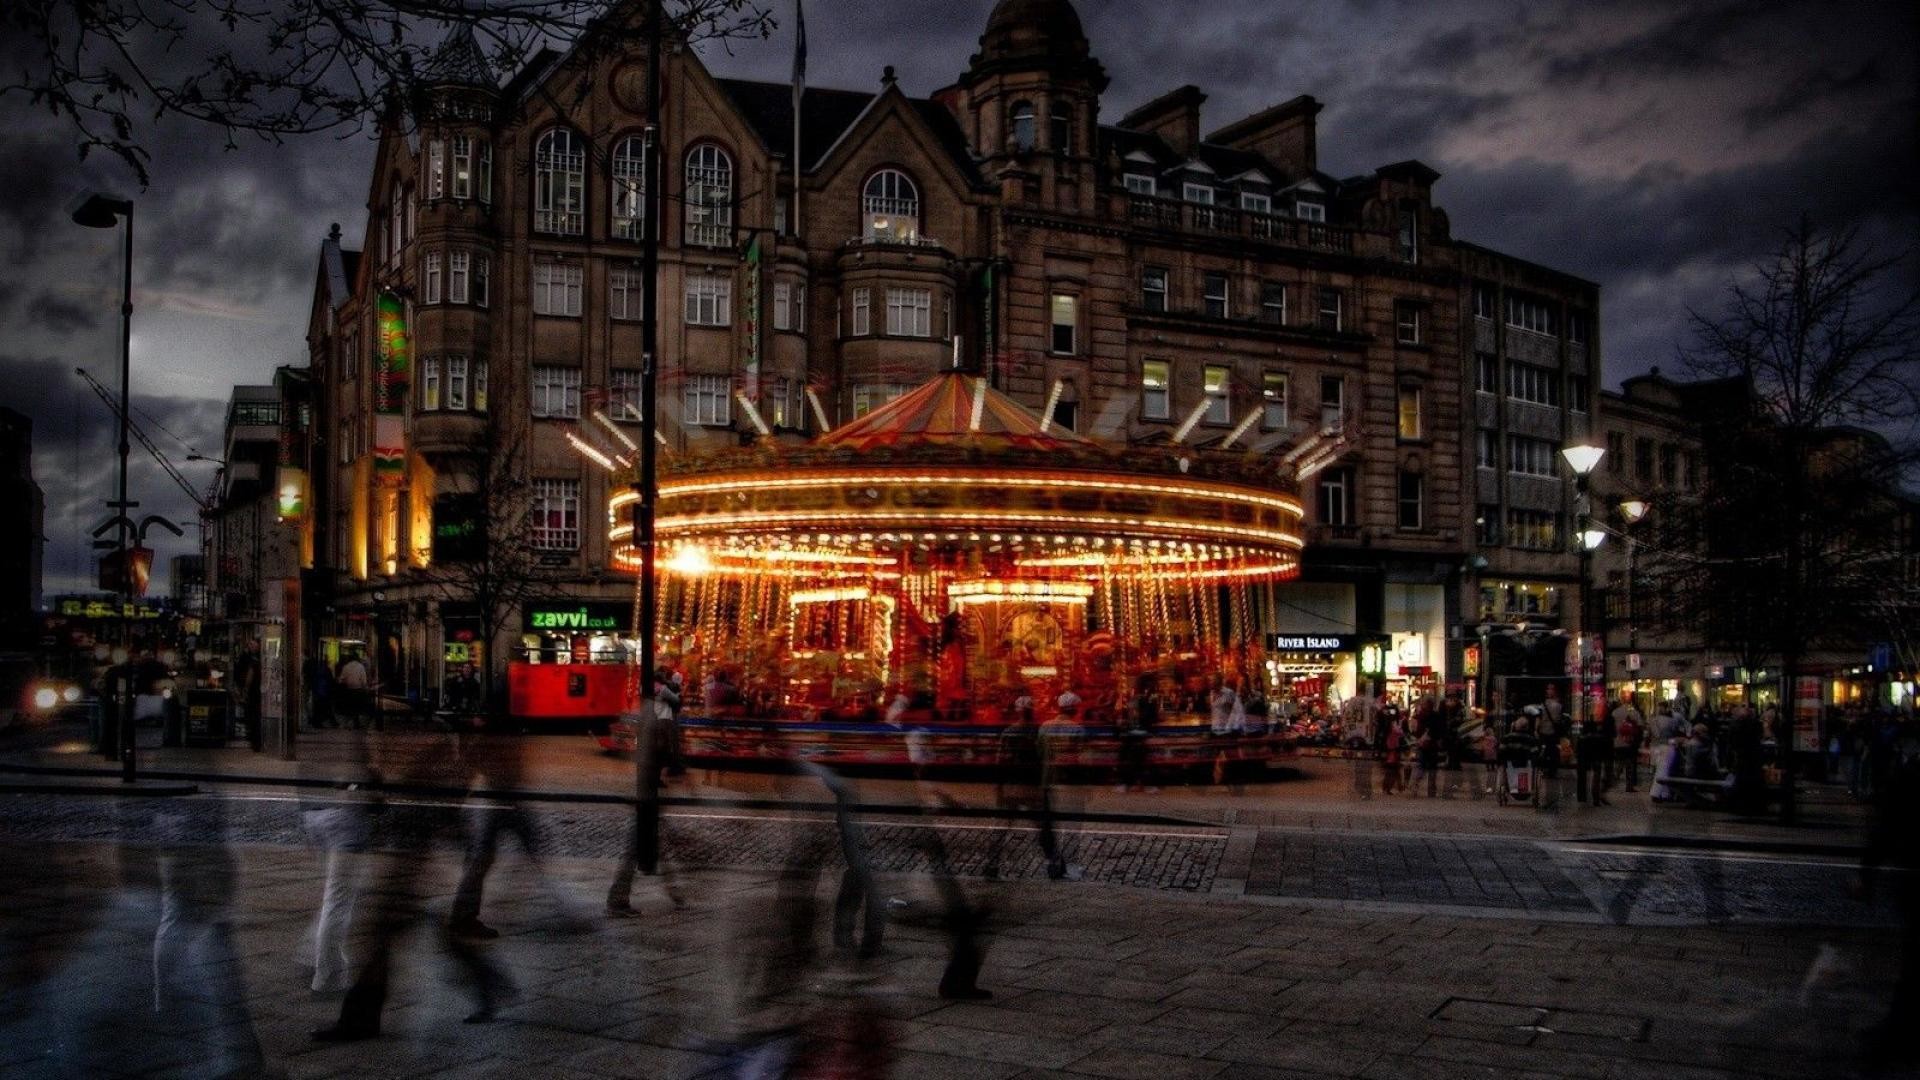 Hd Merry Go Round In Sheffield Engl Hdr Wallpaper - Merry Go Round Hd - HD Wallpaper 